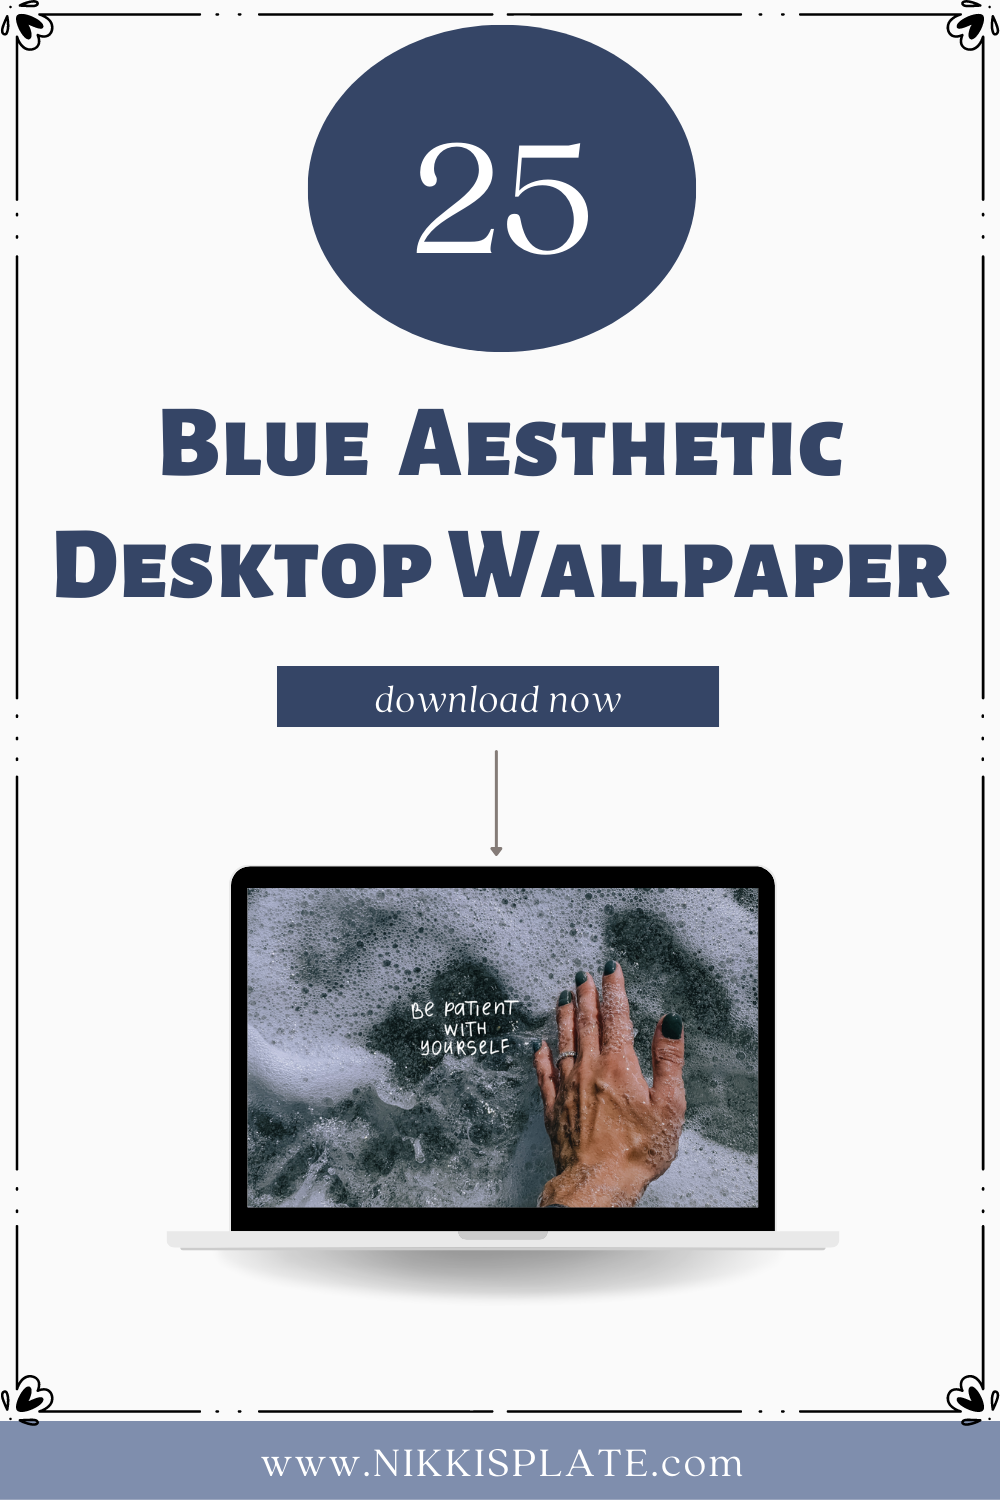 Aesthetic Desktop Wallpaper Stock Photos, Images and Backgrounds for Free  Download